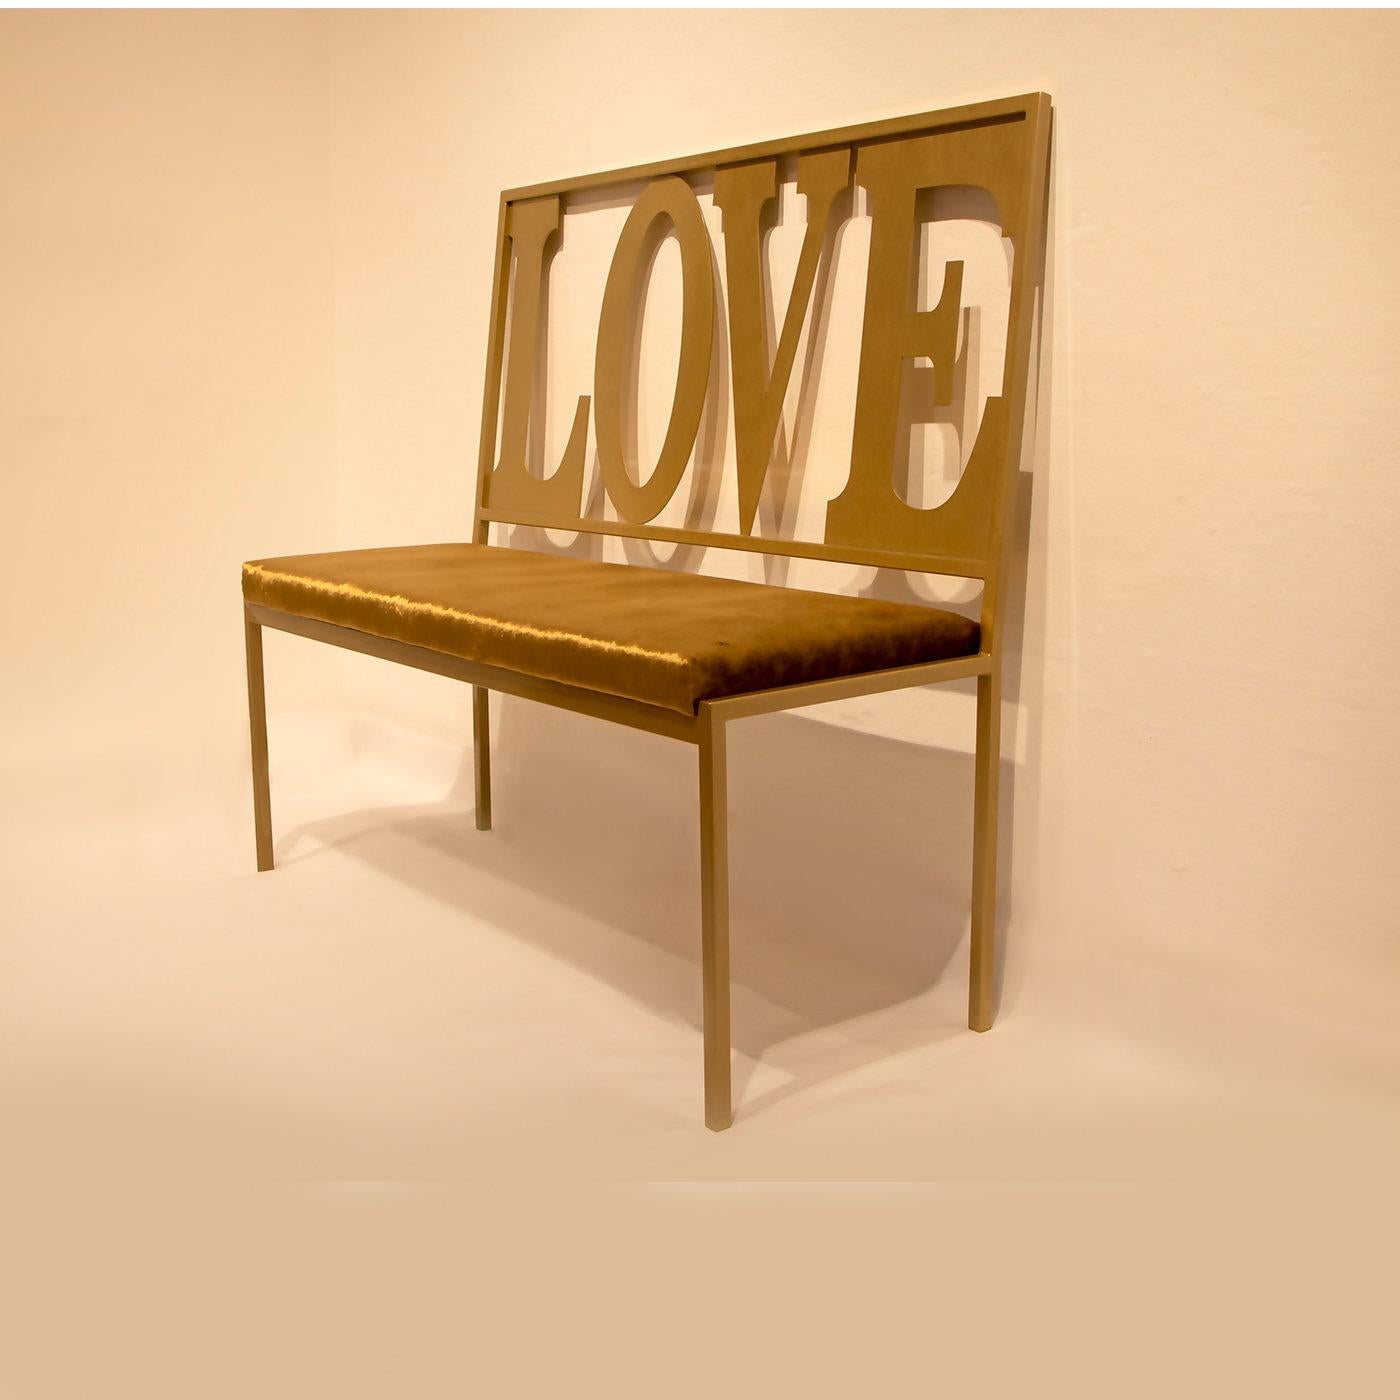 Part of the Imperfect Love Collection inspired by the desire to offer design objects with unique flair, this handcrafted iron bench showcases a warm golden finish and coordinated velvet seat upholstery. Available also in black with black, blue,